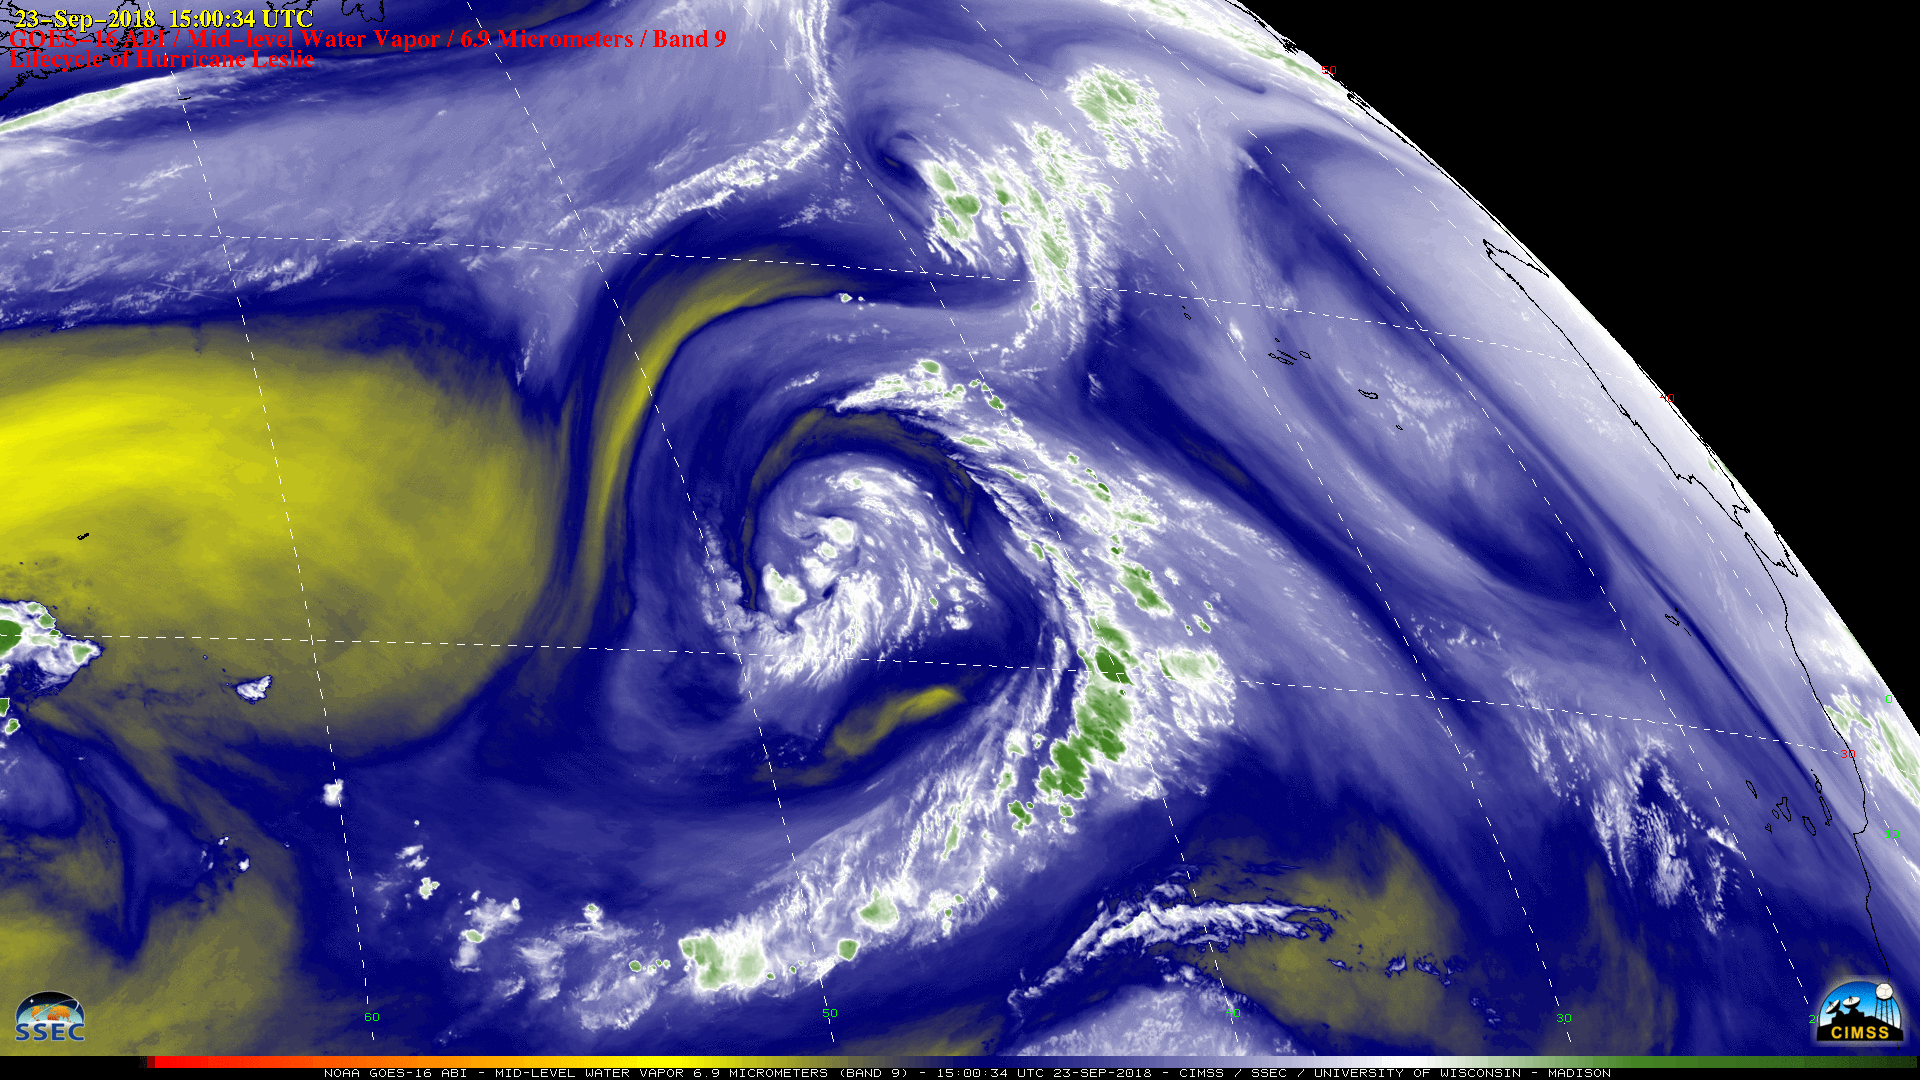 GOES-16 Mid-level Water Vapor (6.9 µm) images [click to play MP4 animation]